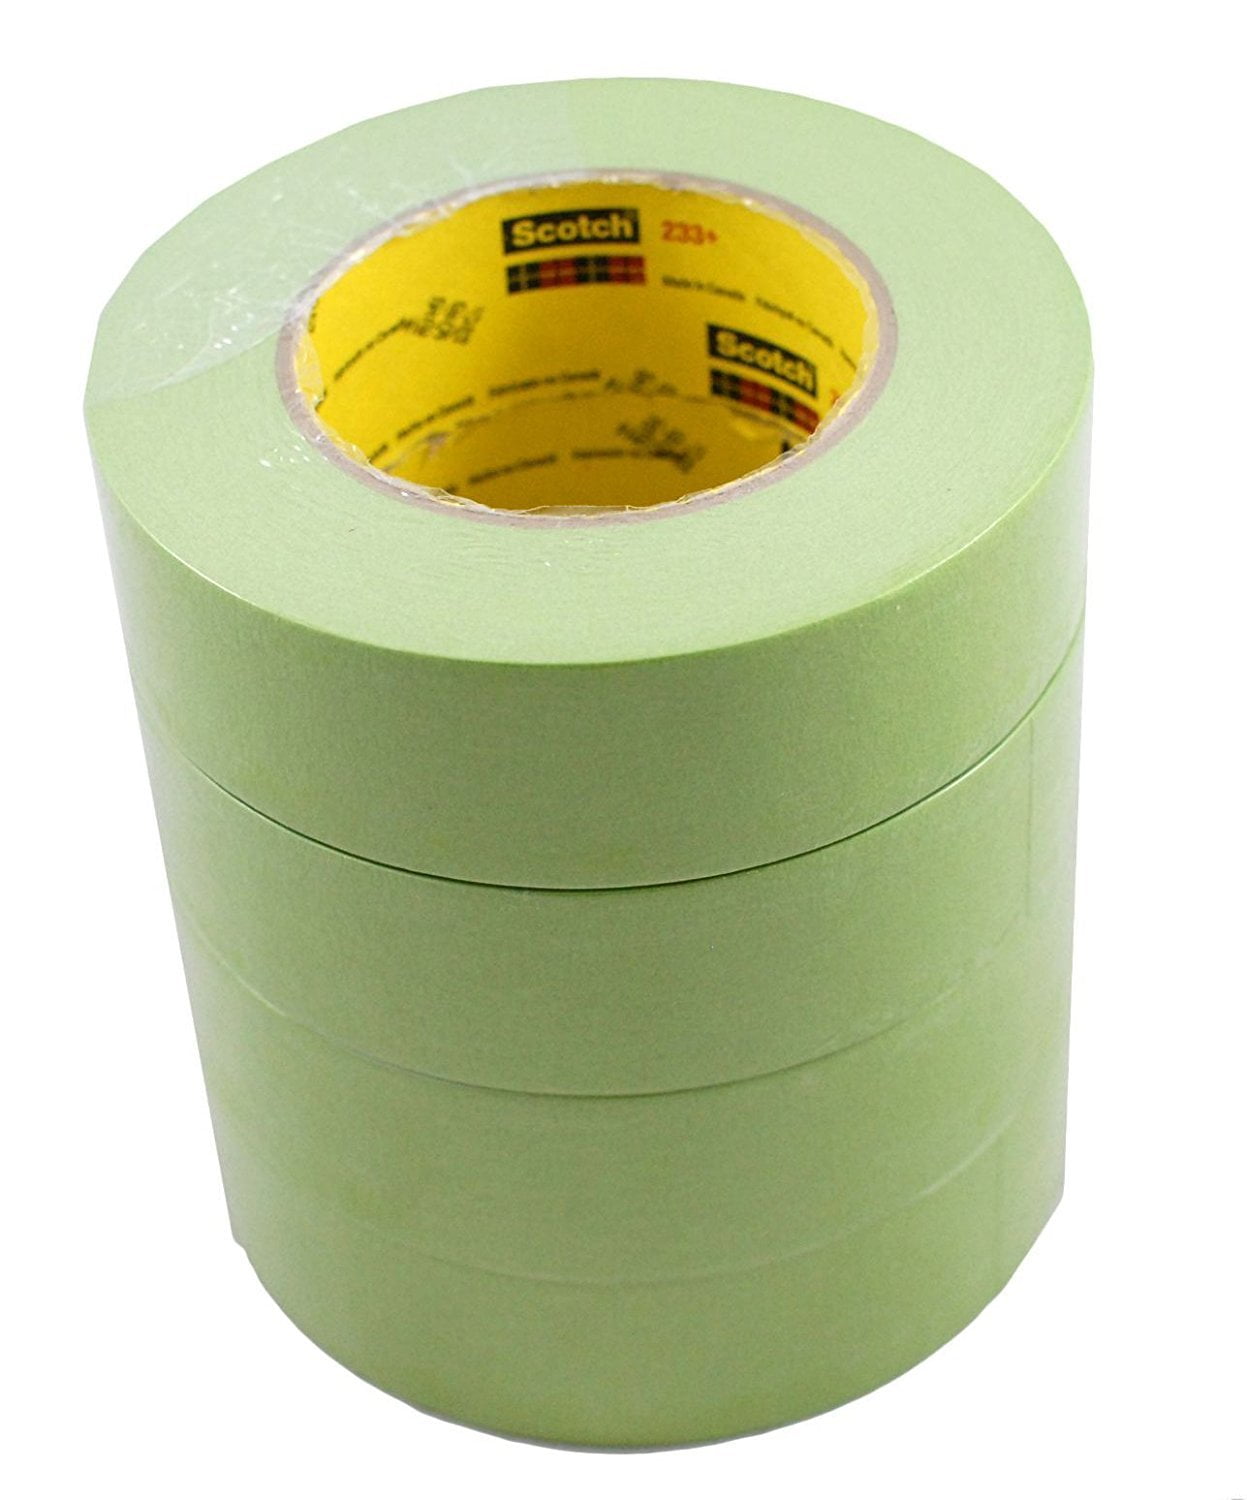 12 Rolls of 3M 06652 3/4" Yellow Tape & 6 of 06654 1 1/2" Tape Sleeve of Each 